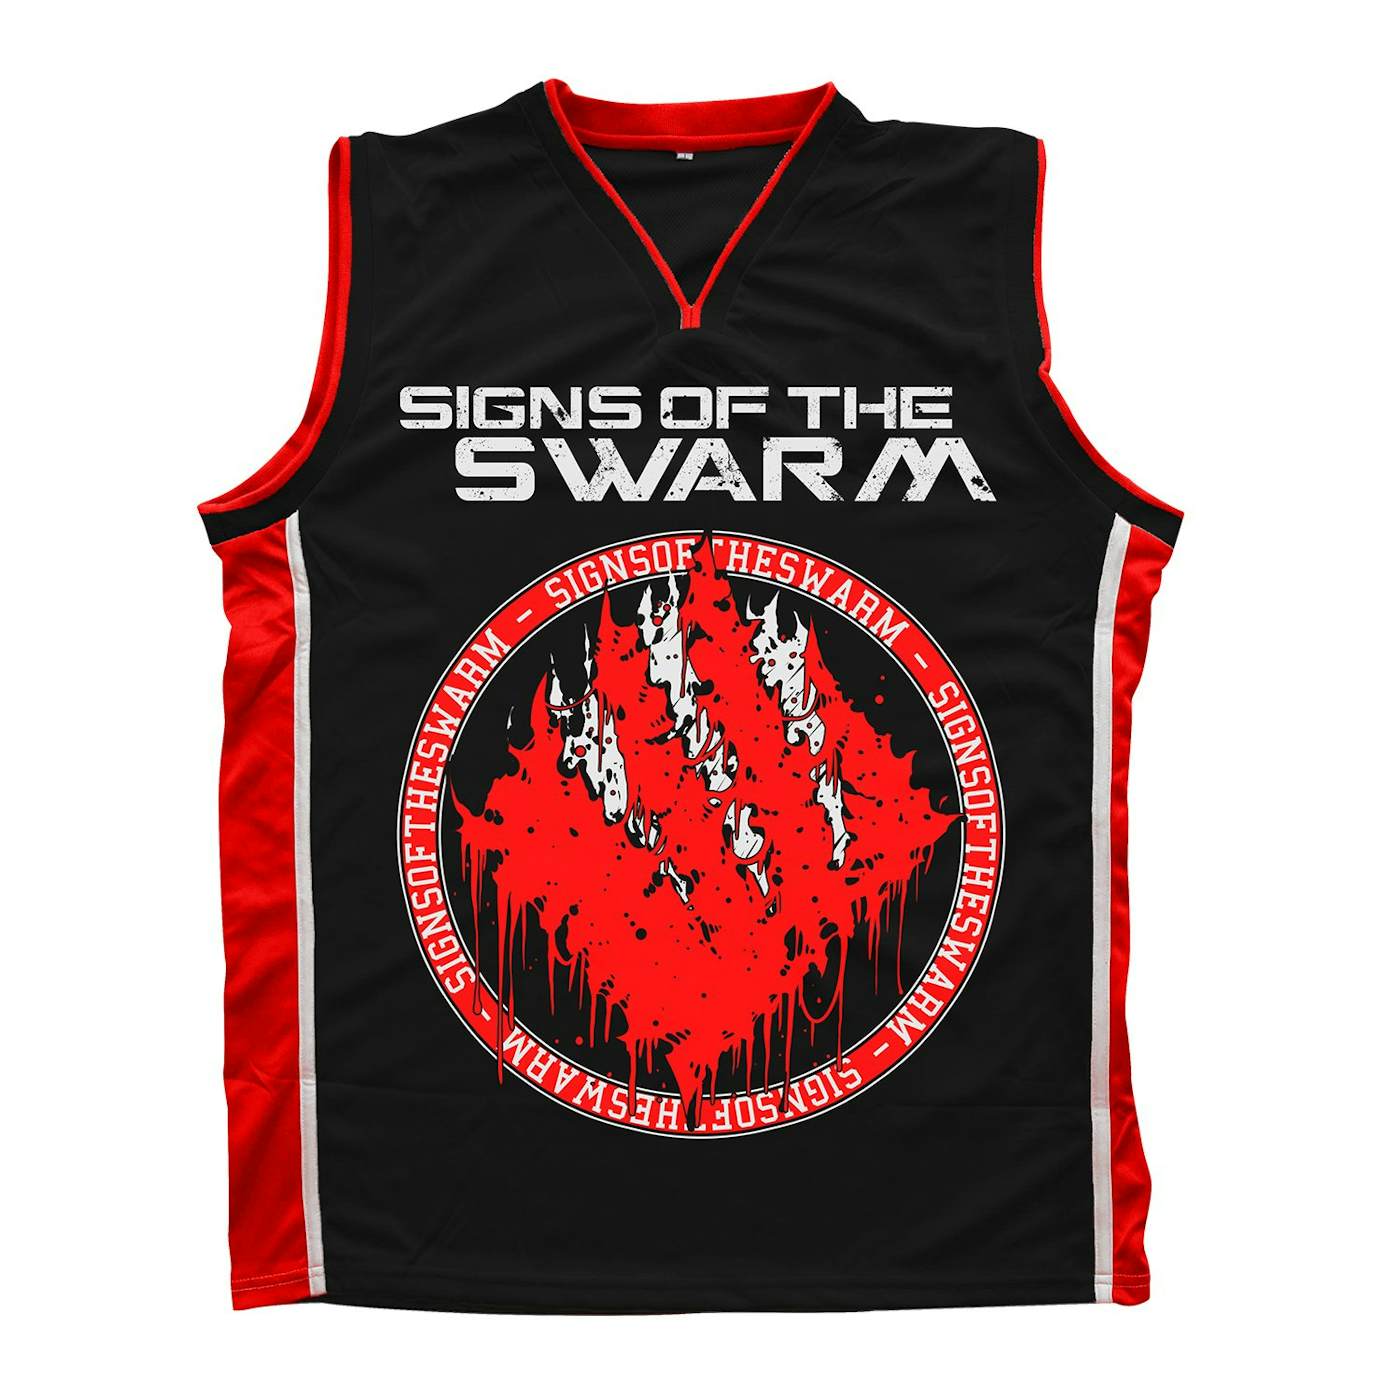 Signs of the Swarm "Team Jersey" Basketball Jerseys